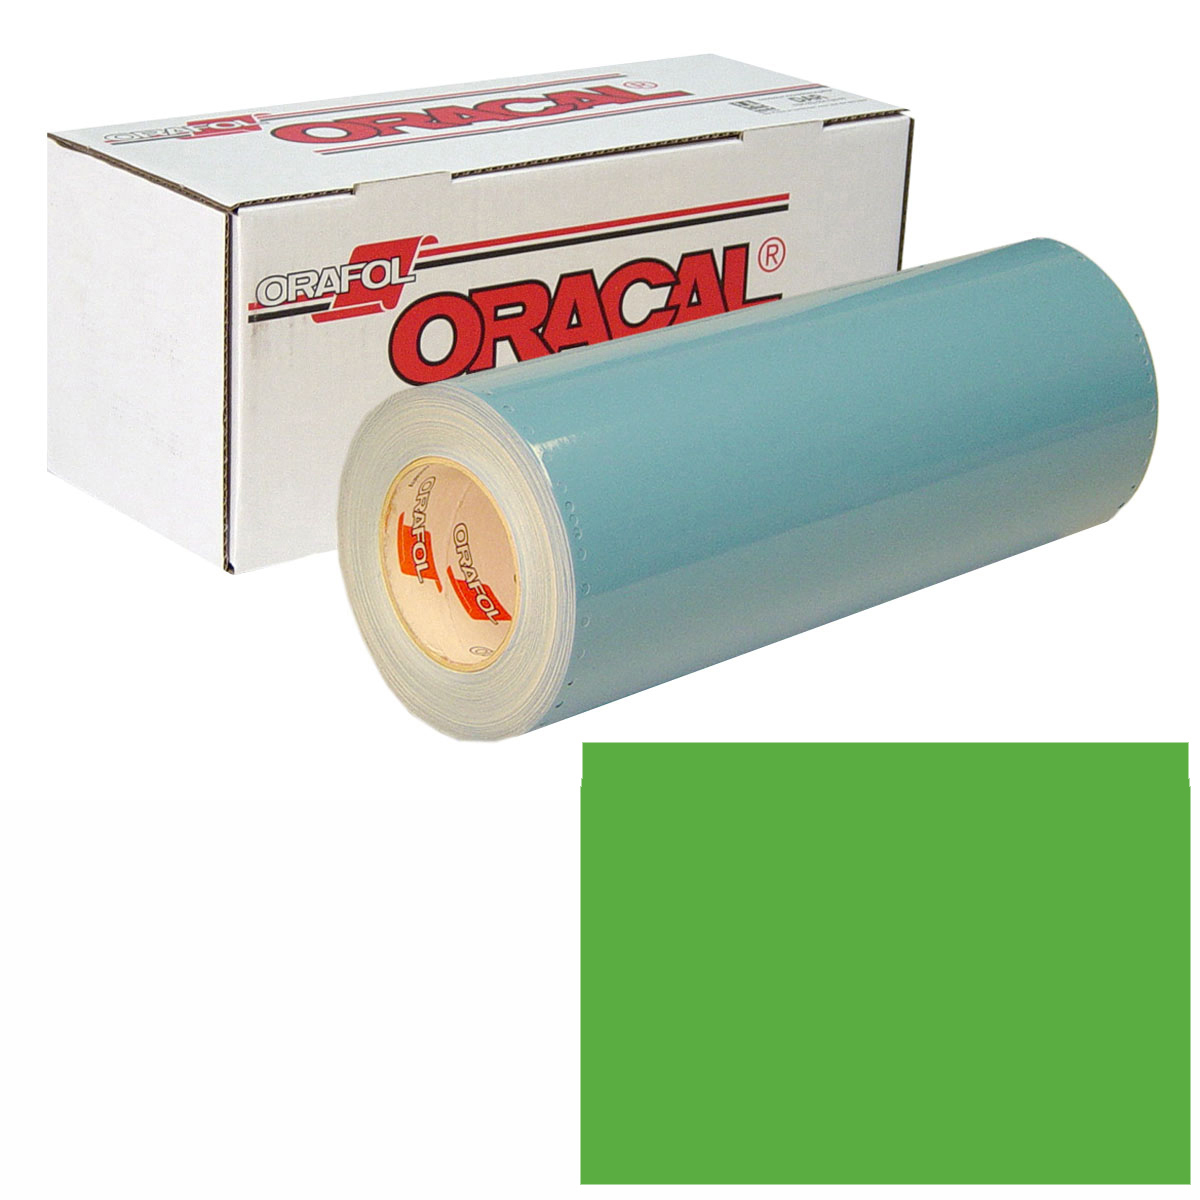 ORACAL 751 Unp 48in X 10yd 063 Lime-Tree Gree